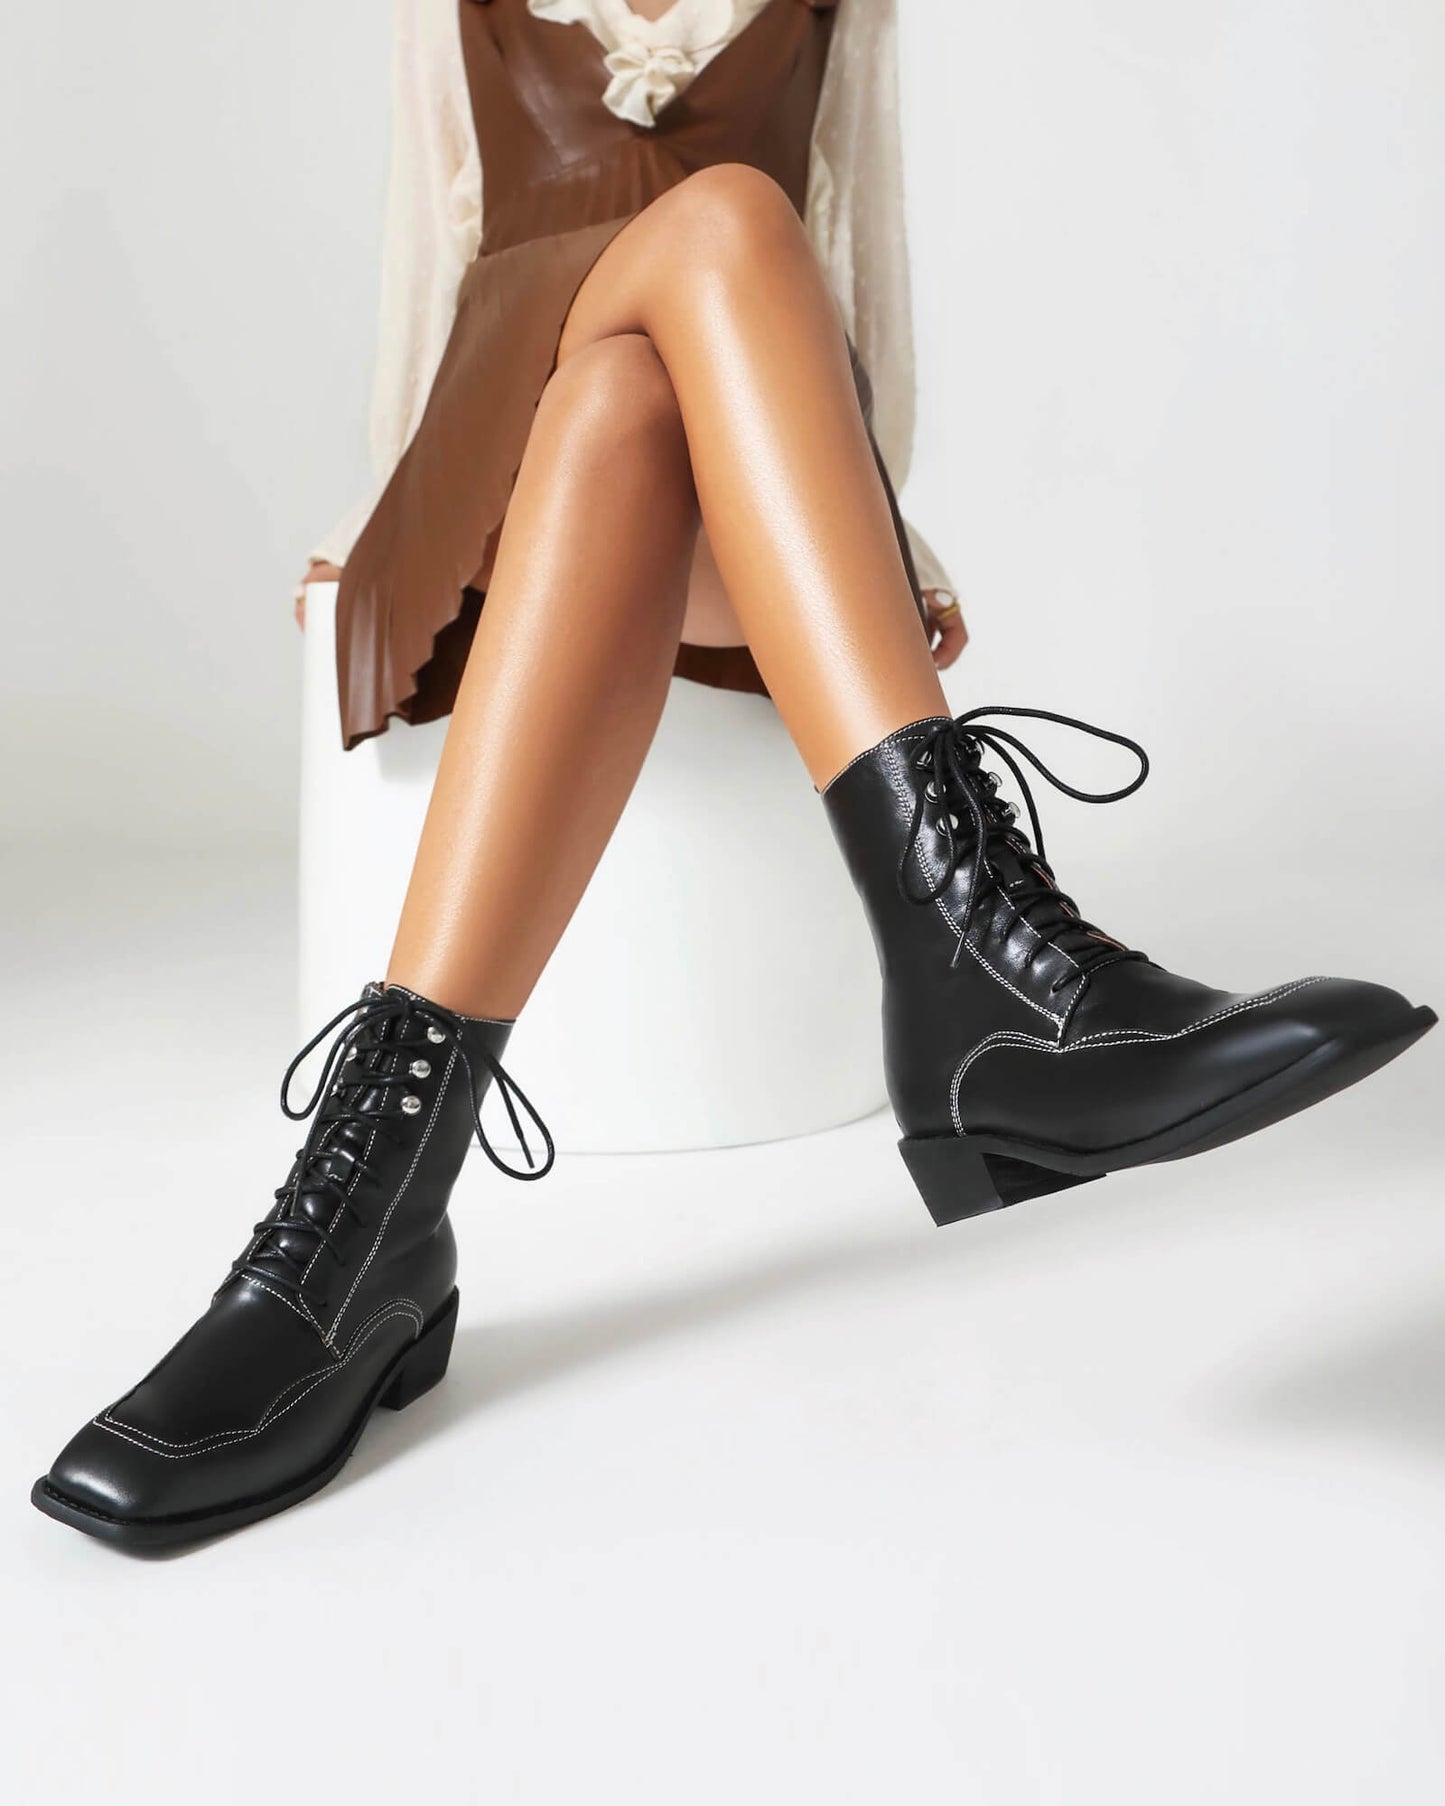 Foria-topstitching-leather-boots-model-5